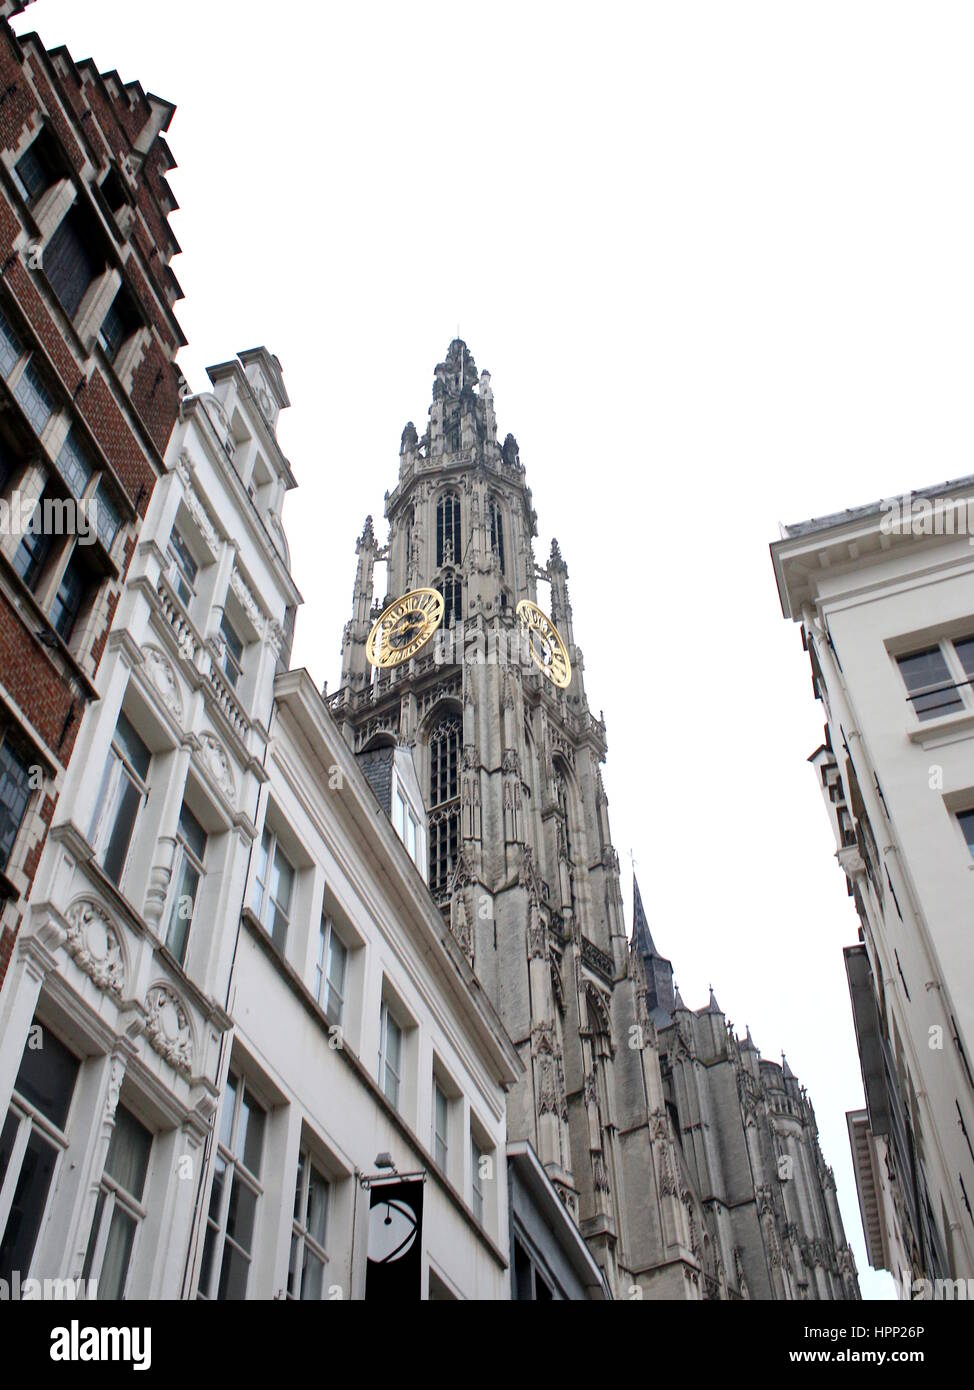 Tower of the Cathedral of our Lady (Onze-lieve-vrouwekathedraal) seen from Grote Markt (Great Market Square), Antwerp, Belgium. Stock Photo